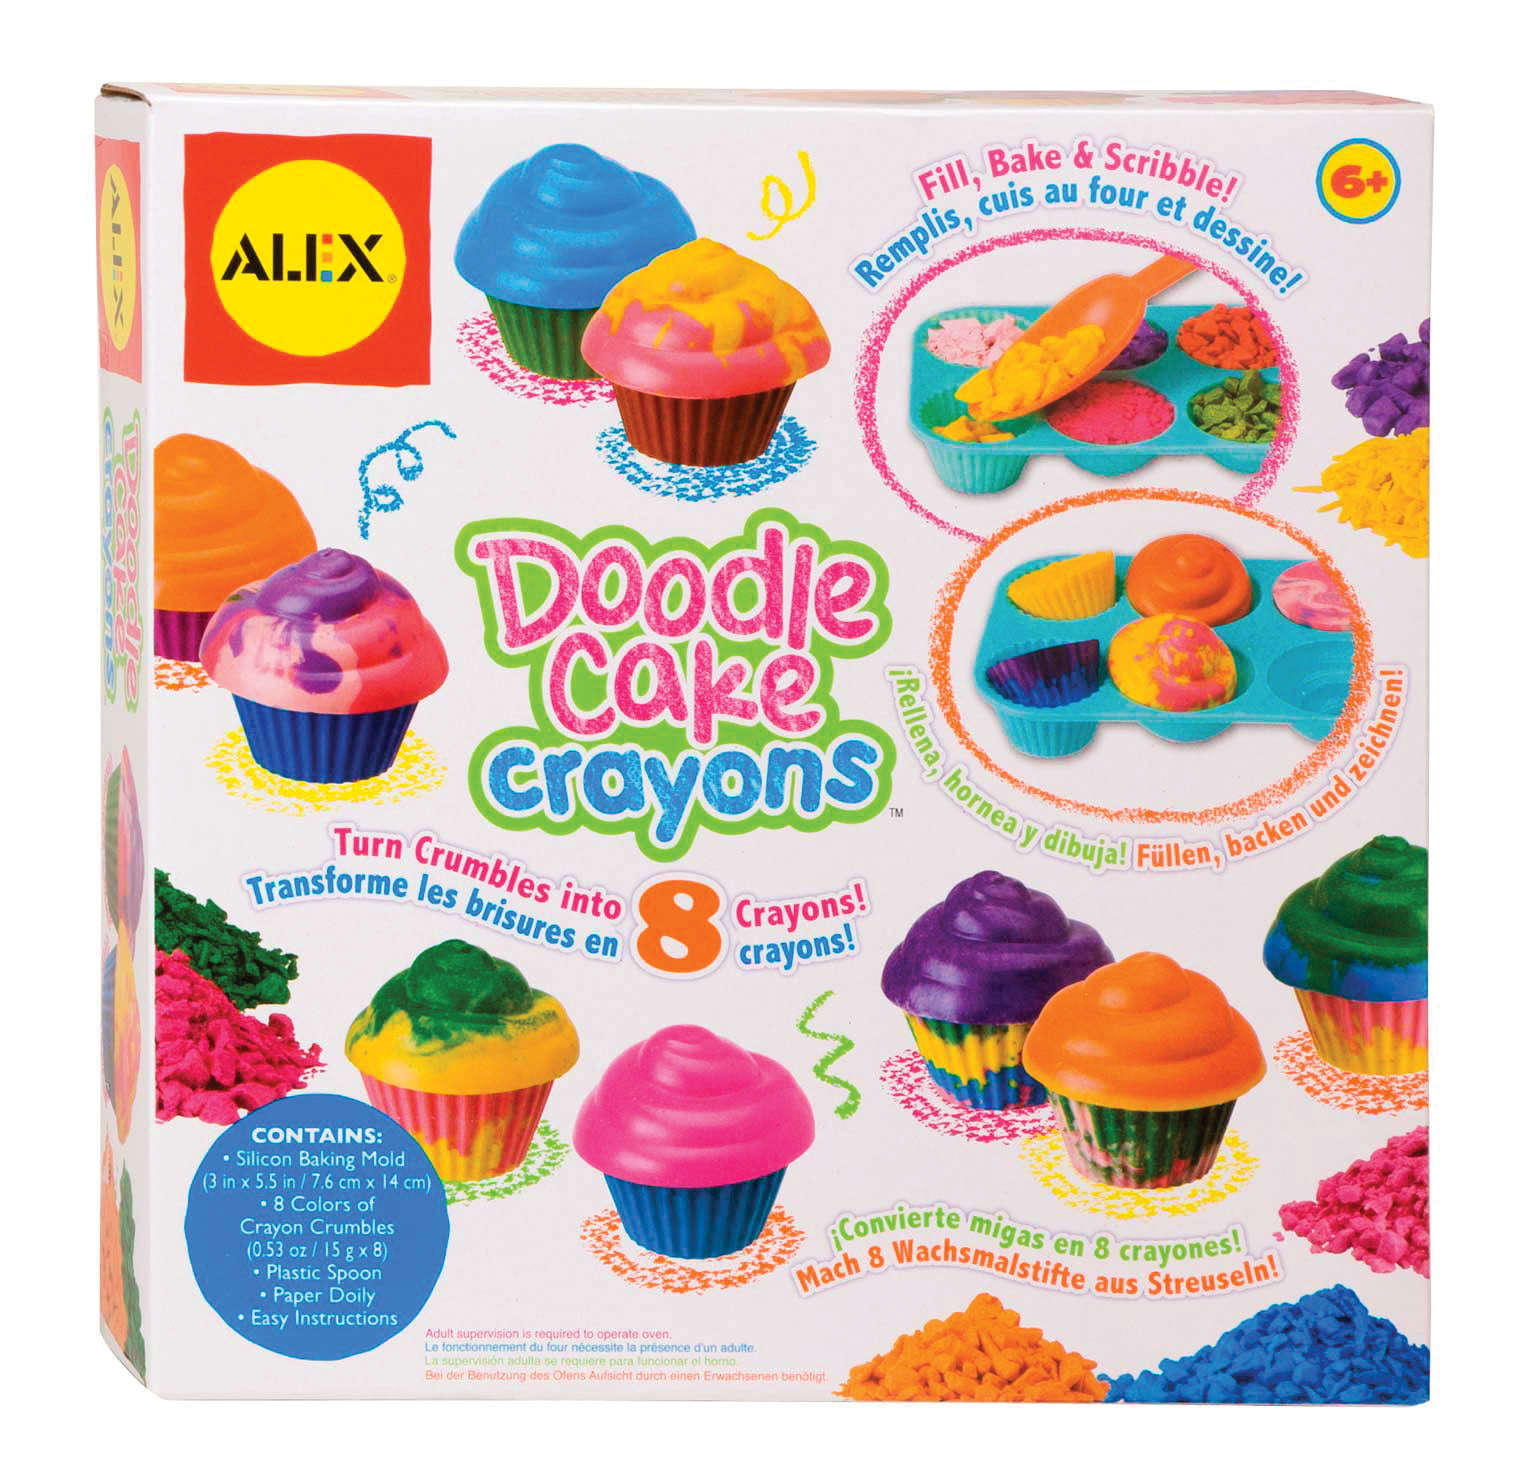 Kids Children Make Your Own Dough Cupcakes,Ice Cream Molding Craft Sets,GIFT SET 